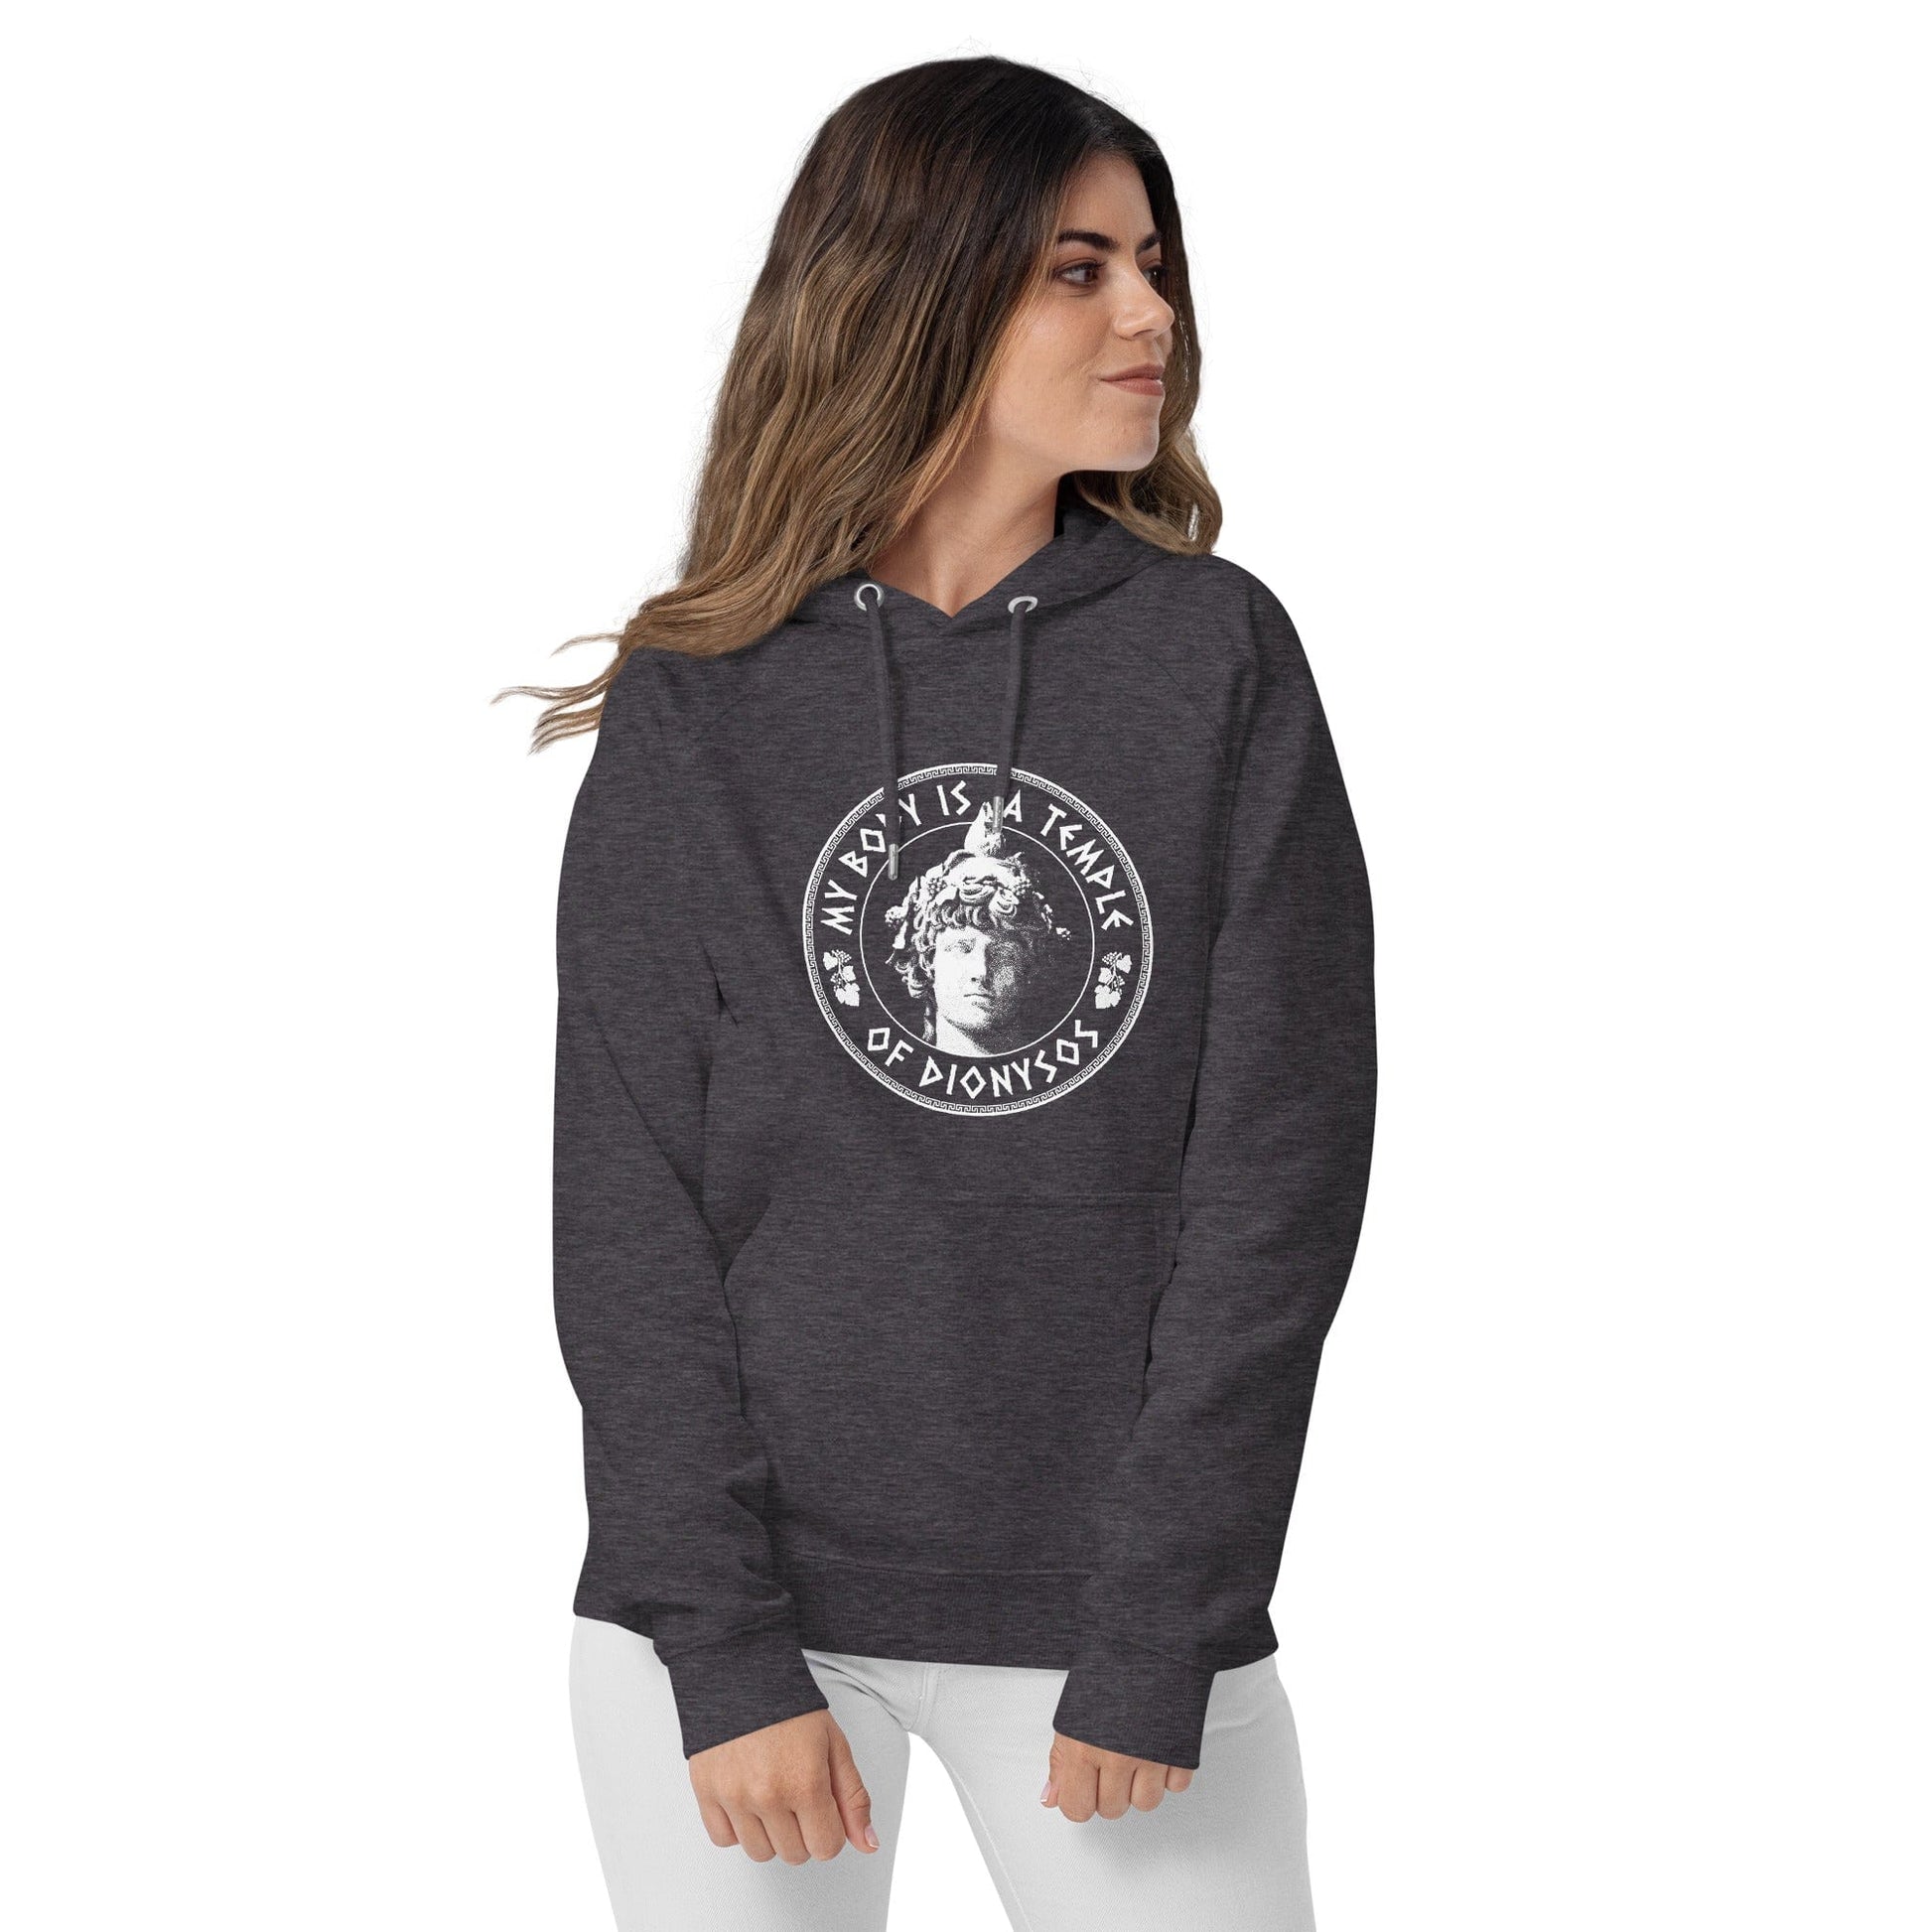 My Body Is A Temple Of Dionysos - Eco Hoodie